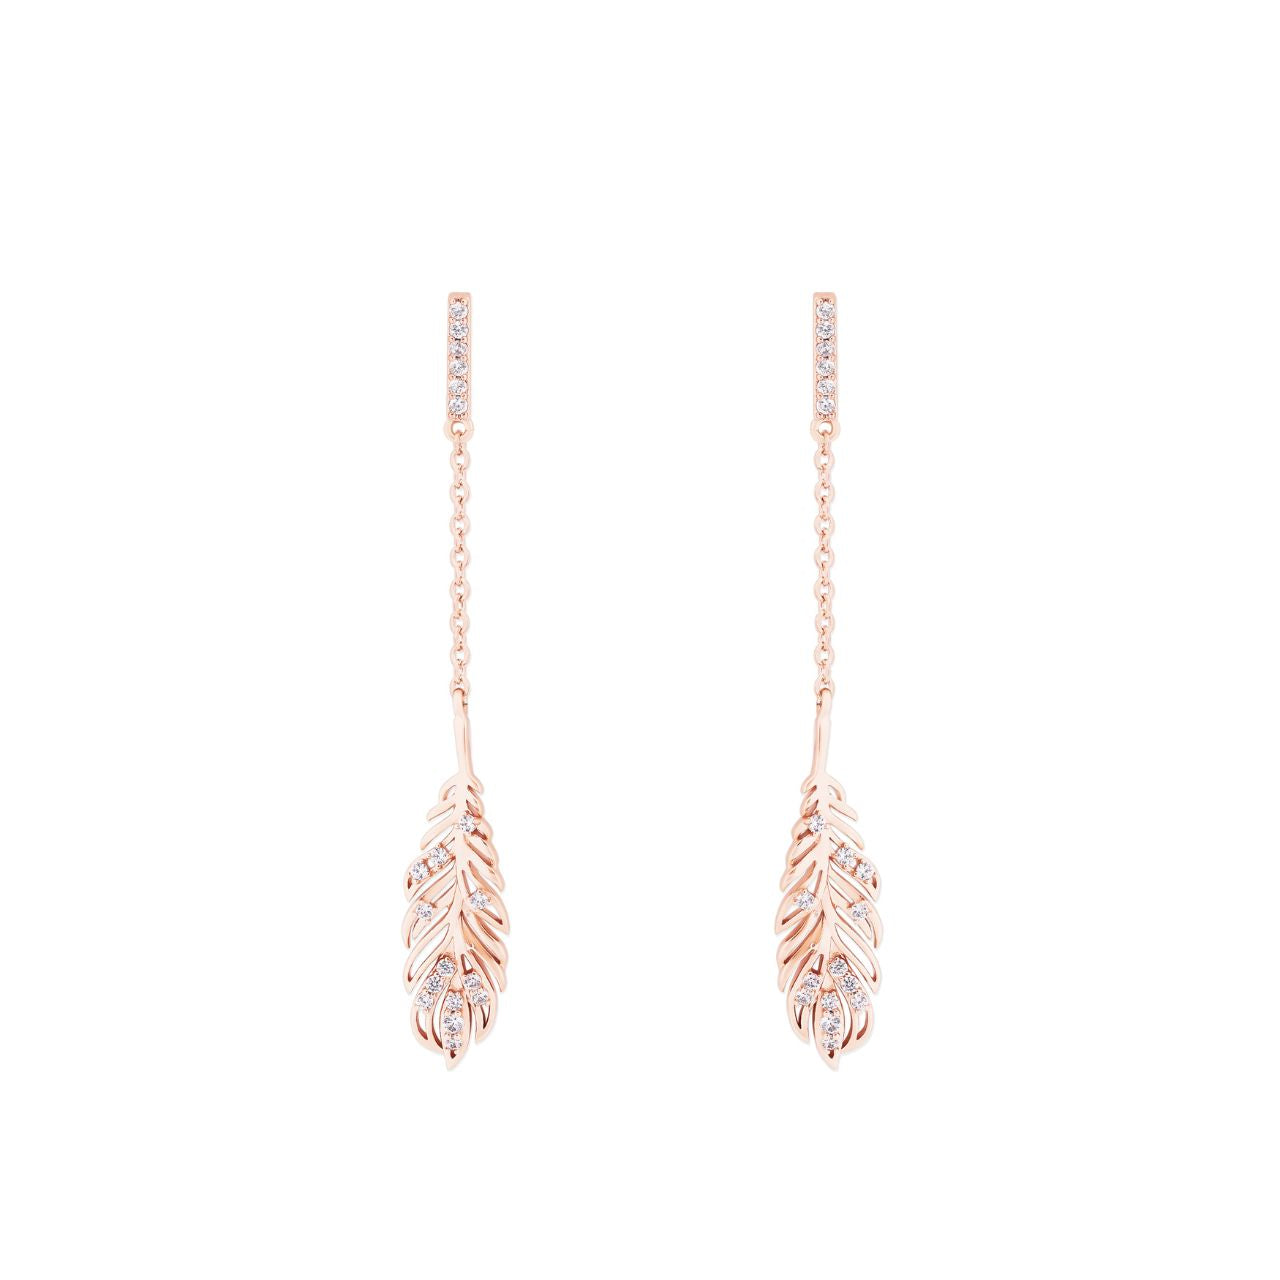 Rose Gold Long Feather Earrings Inset With Clear CZ by Tipperary  The Tipperary Feather long drop earrings offer an elegant take on feather jewellery collection in gold. These long drop earrings offer a modern twist on traditional jewellery designs. Wear them to add a touch of sophistication to any outfit.